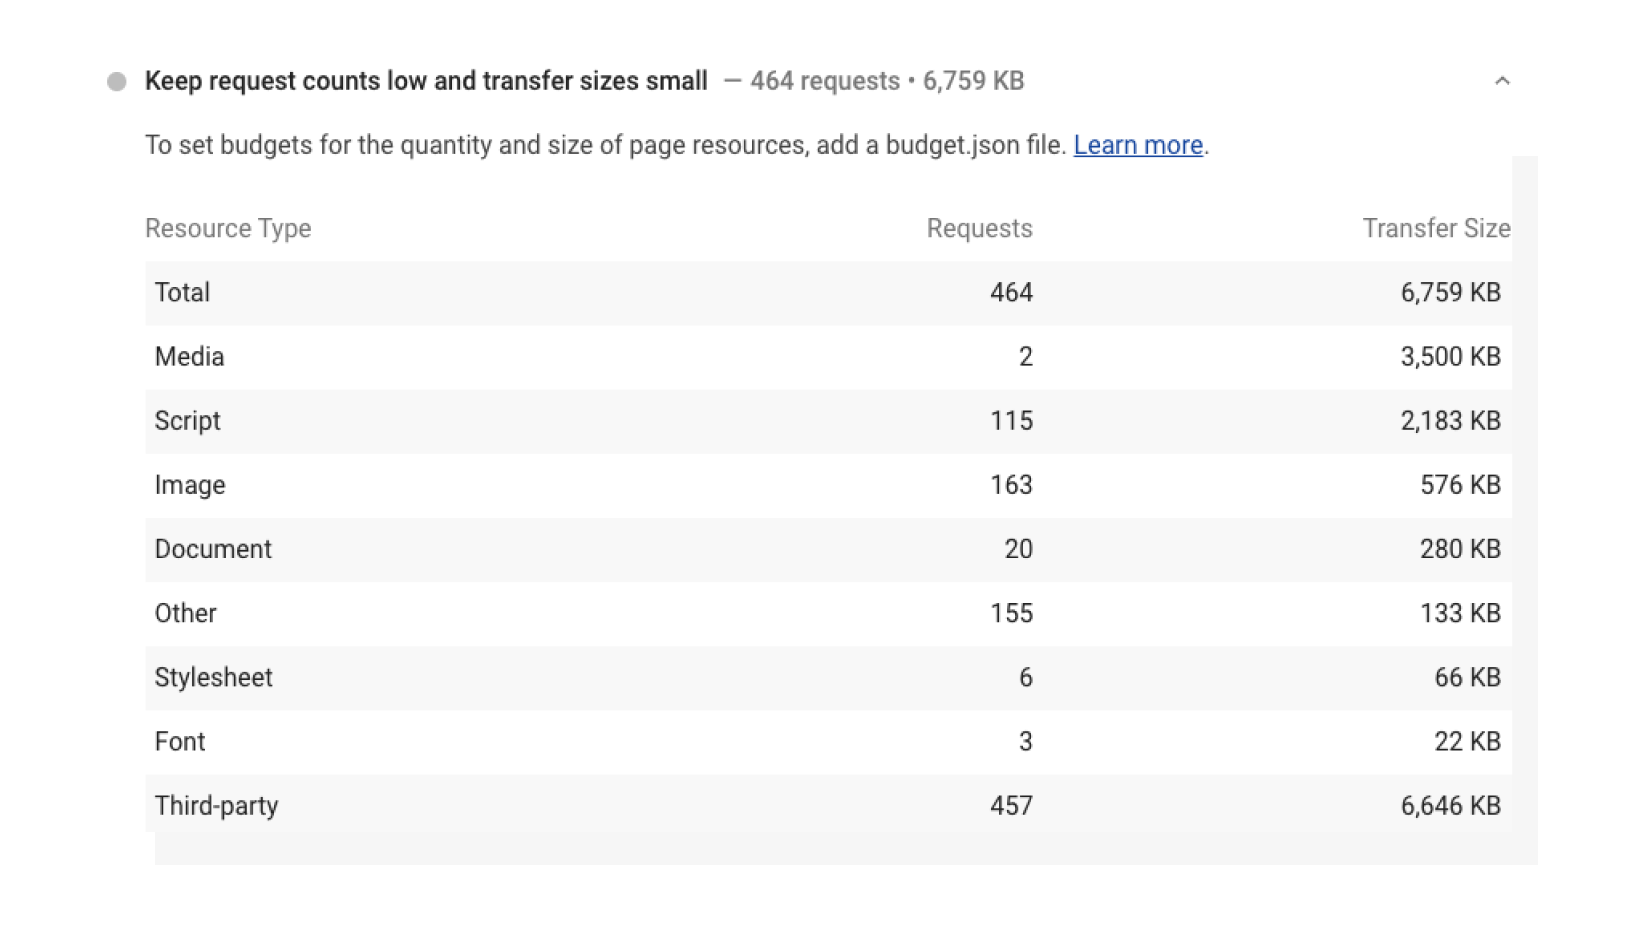 A screenshot of the Lighthouse Keep request counts low and transfer sizes small audit